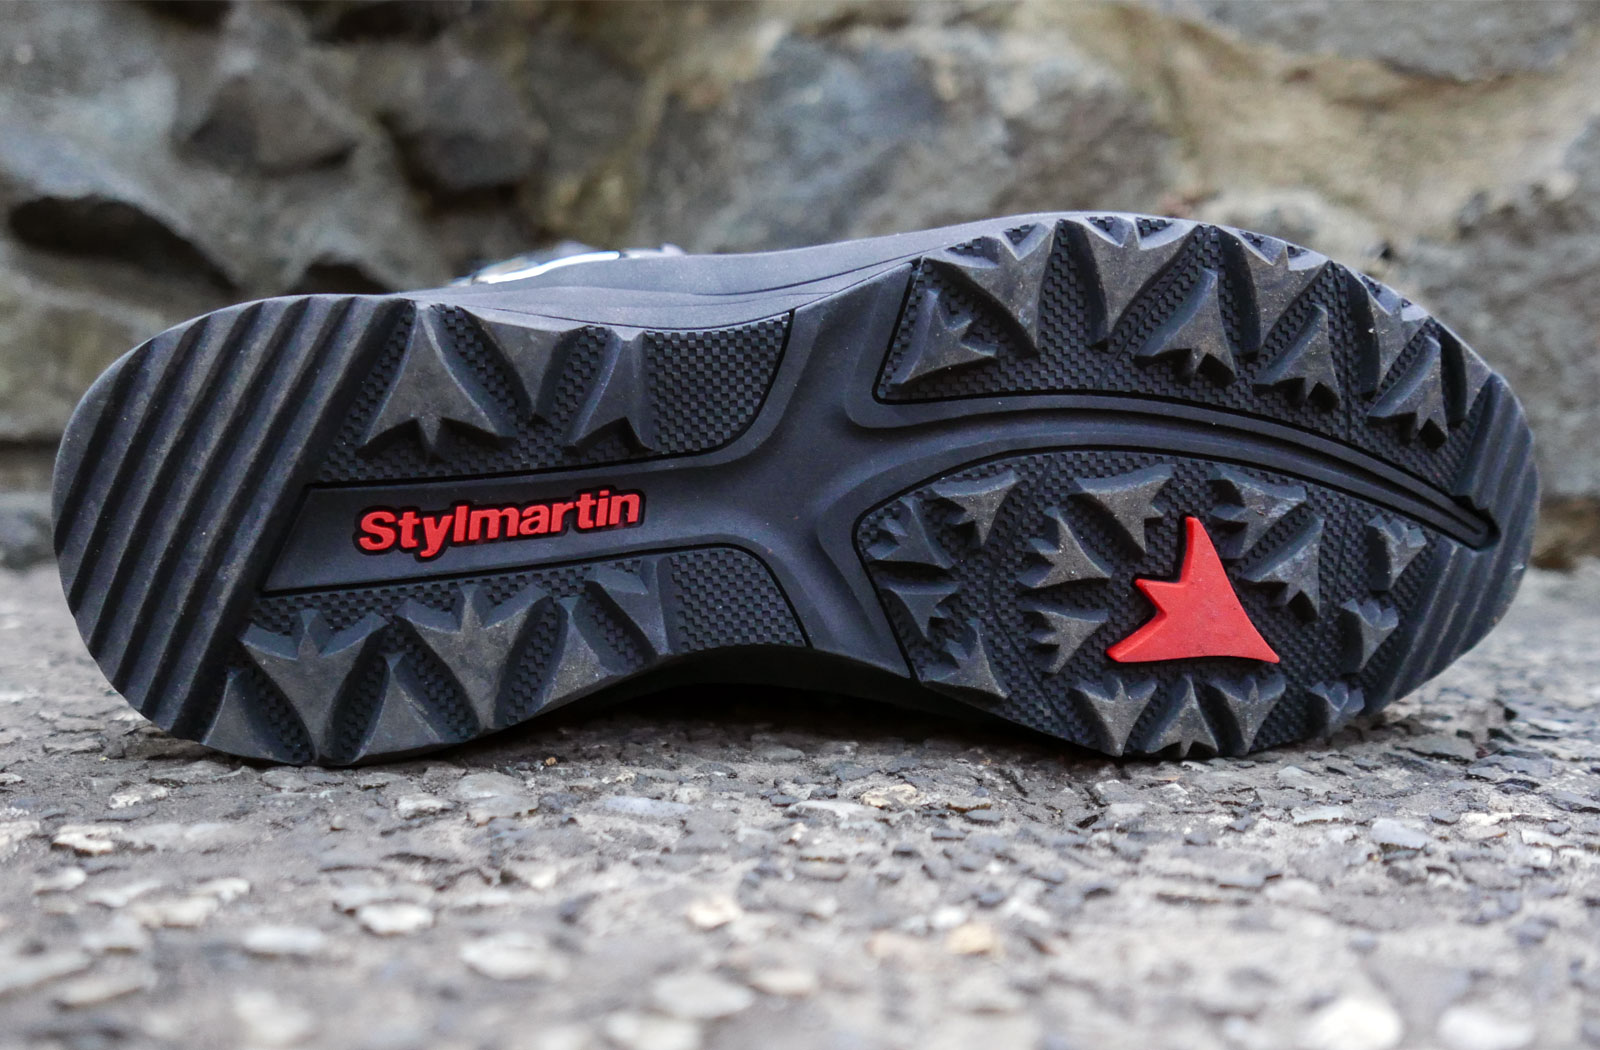 Touring Boots by Stymartin